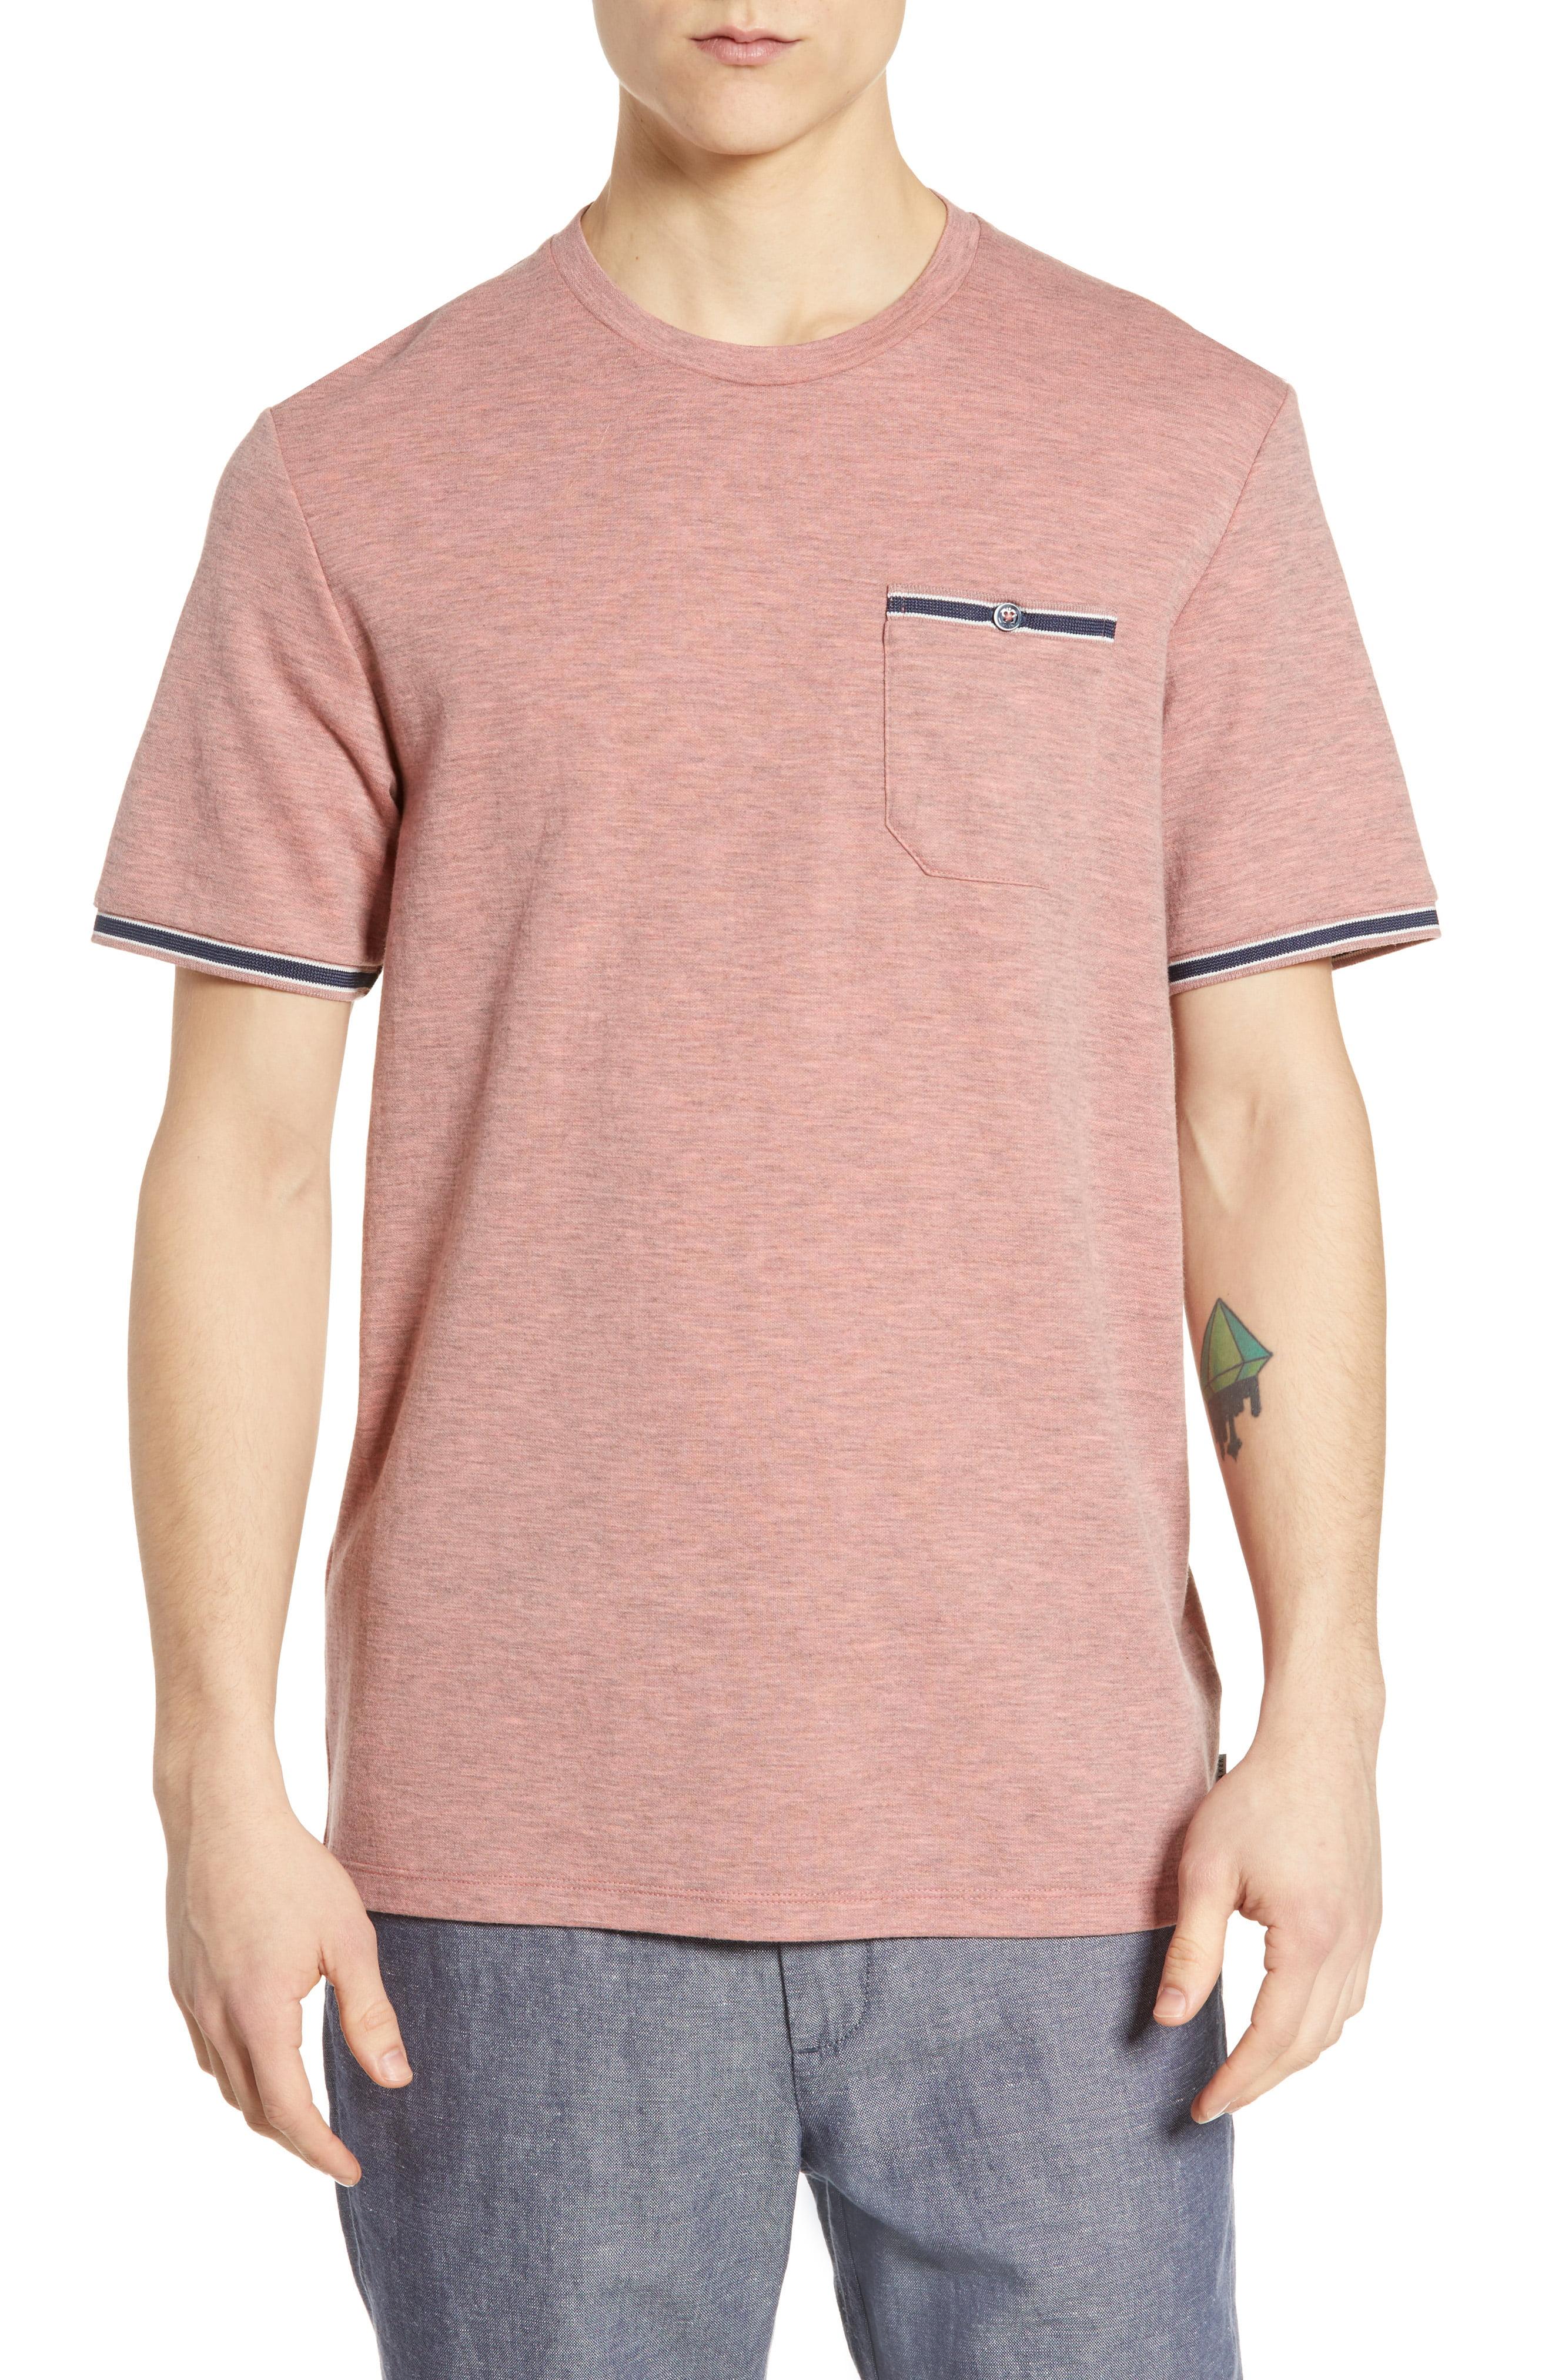 Ted Baker Khaos Slim Fit T-shirt in Pink for Men - Lyst